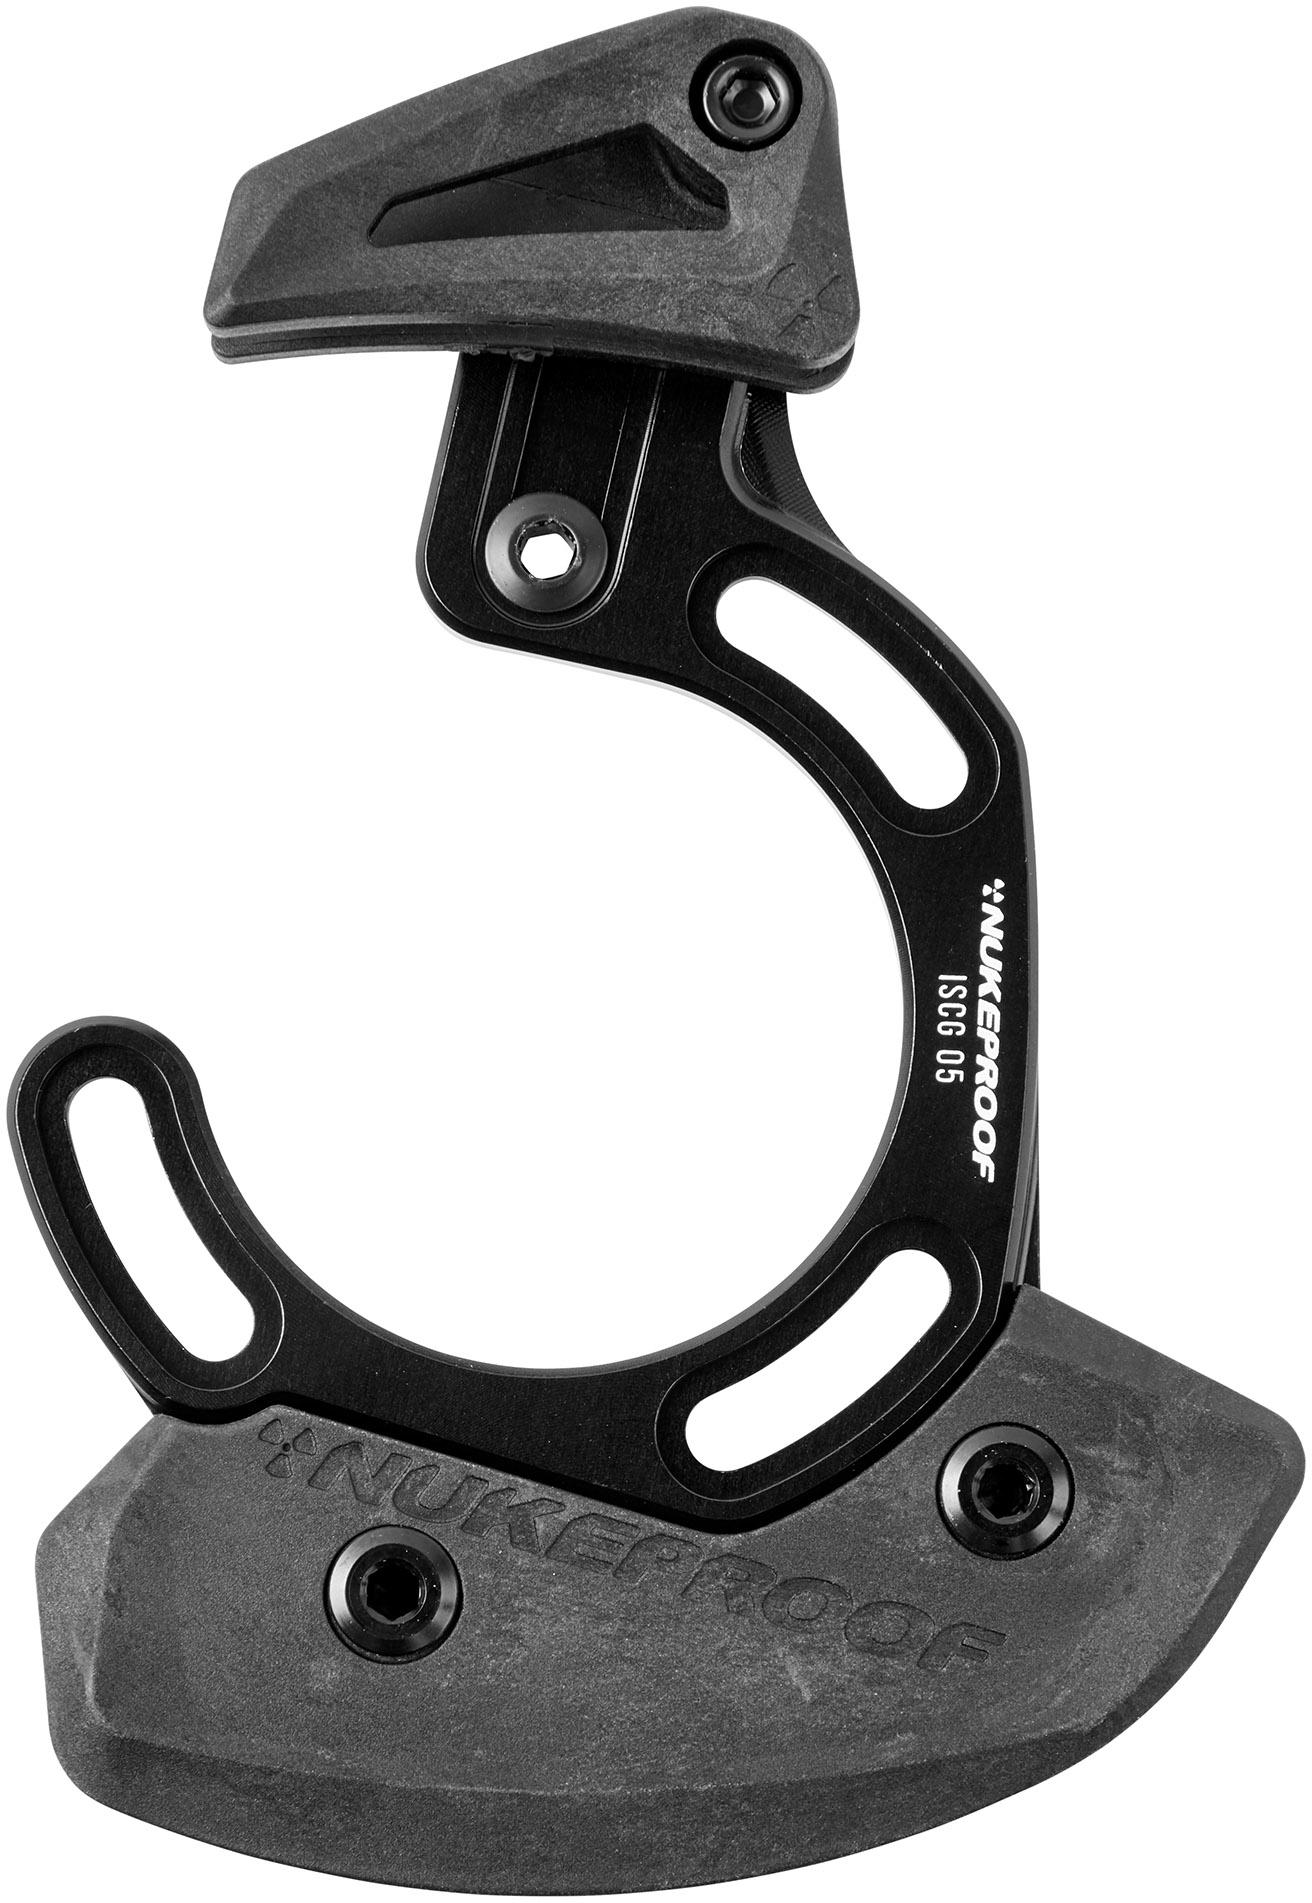 Nukeproof Chain Guide Iscg 05 Top Guide With Bash  Black/black